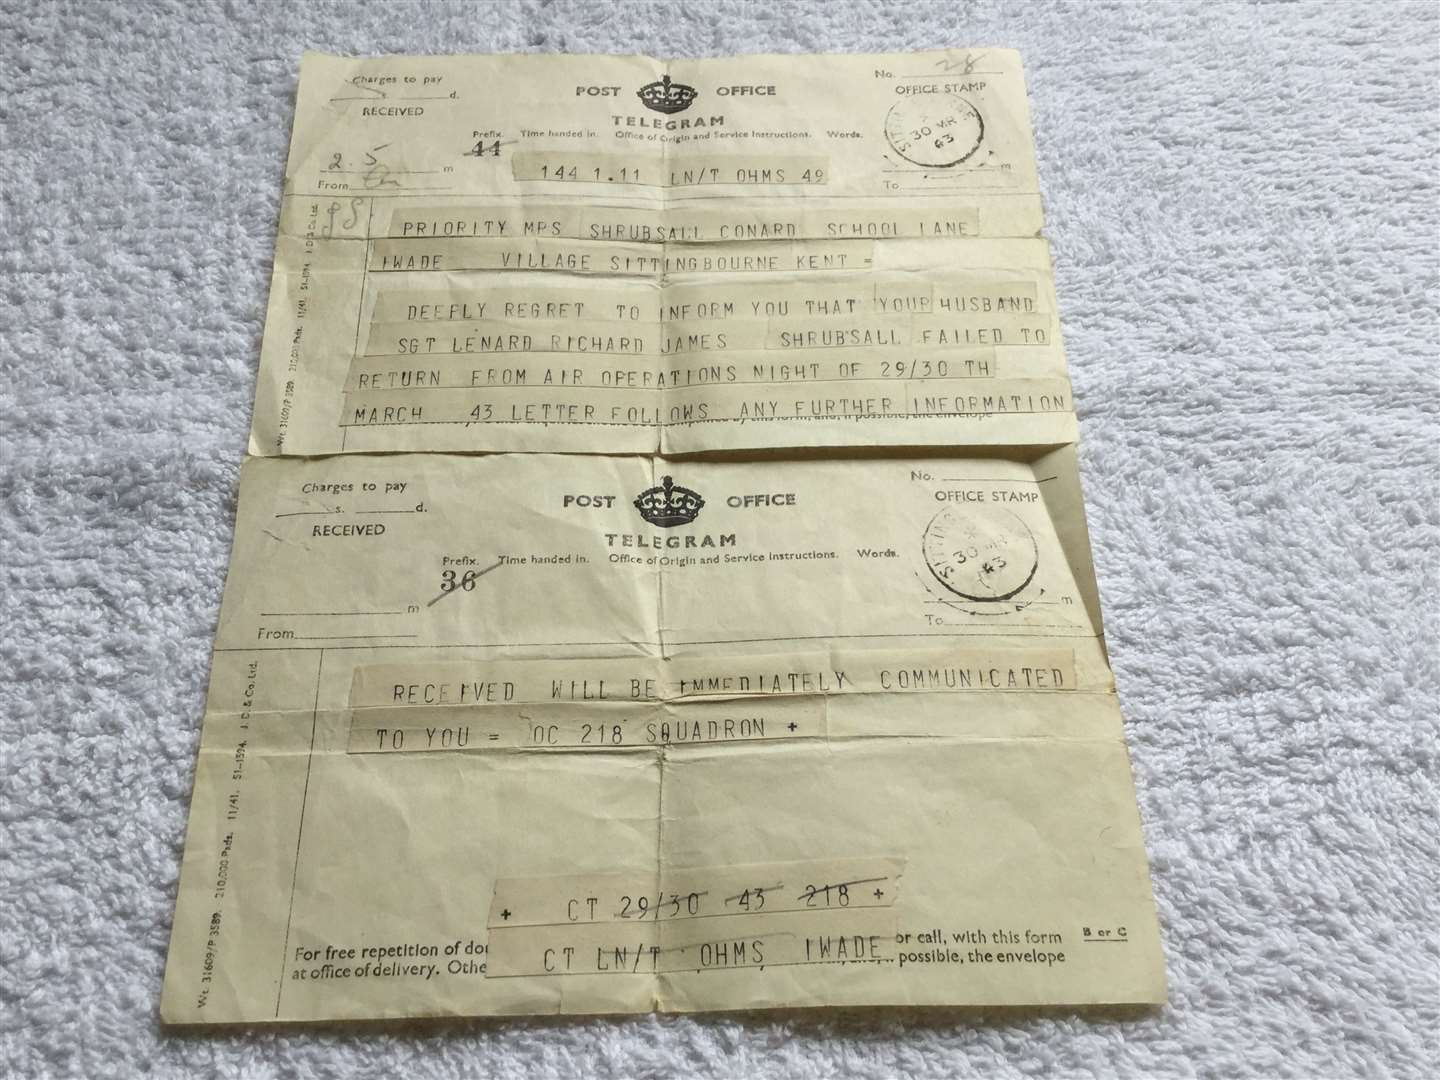 The telegram sent to Sgt Leonard Shrubsall's family after the Short Stirling Bomber plane was lost in 1943